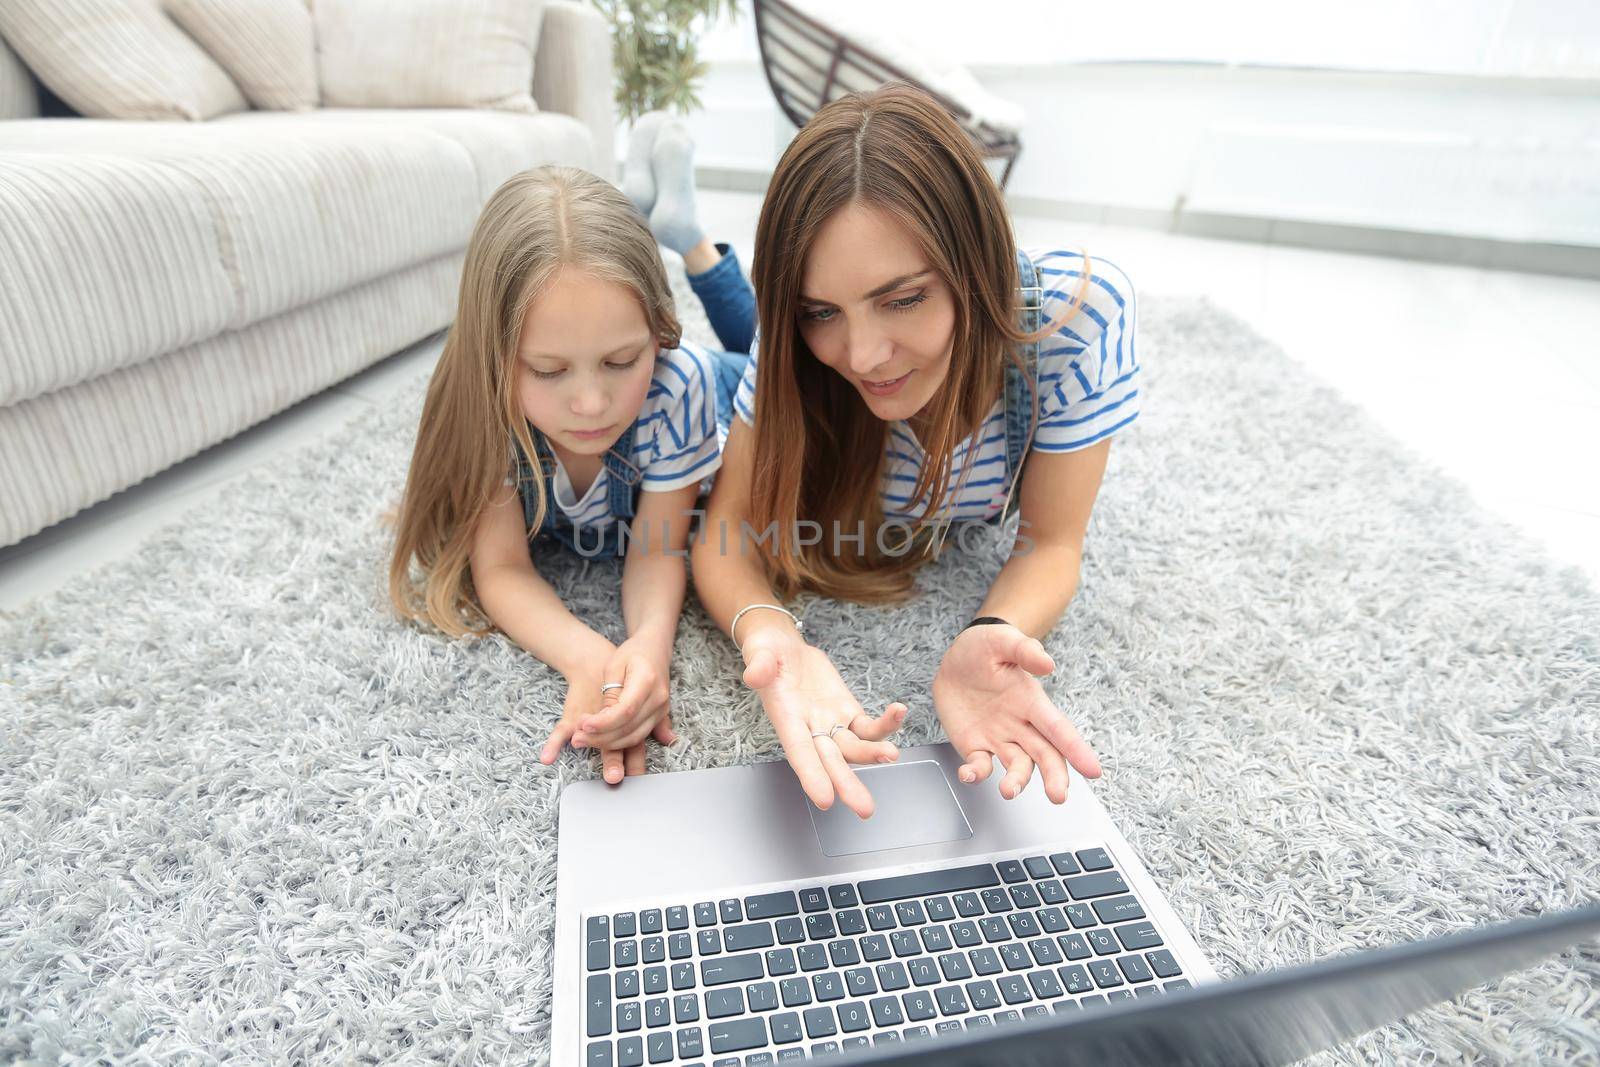 mom and daughter lying on the carpet and using a laptop.people and technology